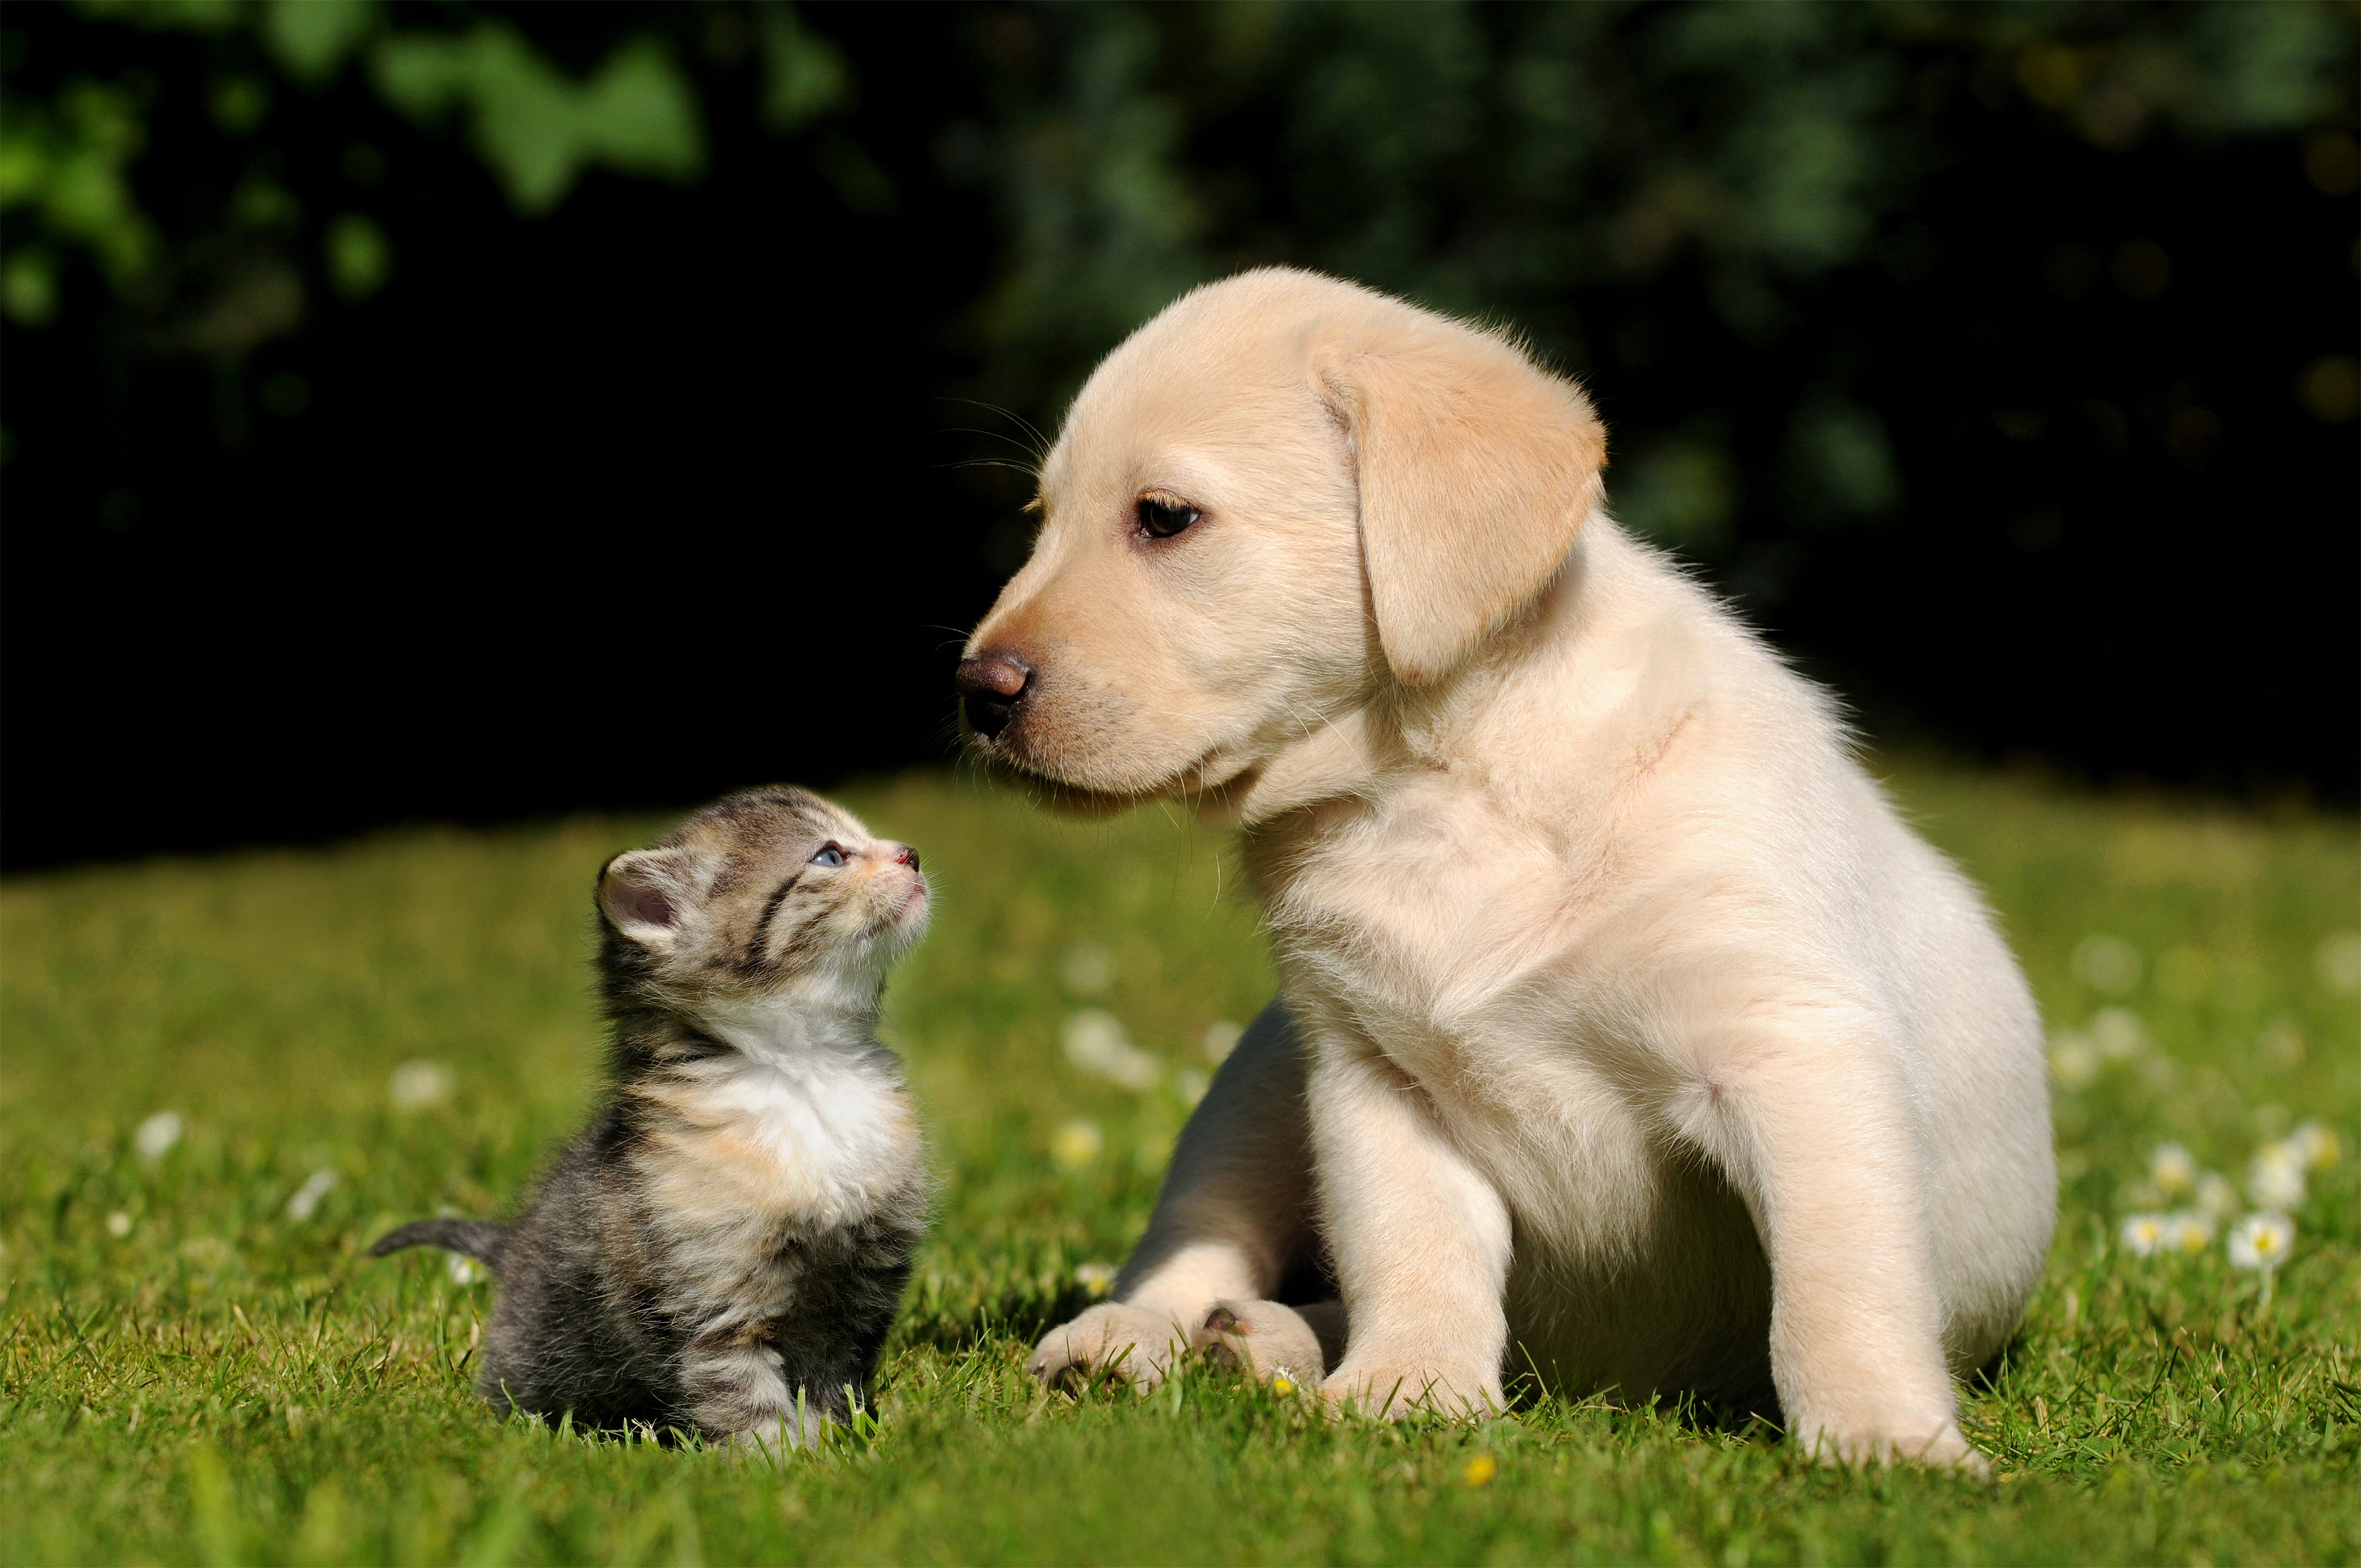 cute little puppies and kittens